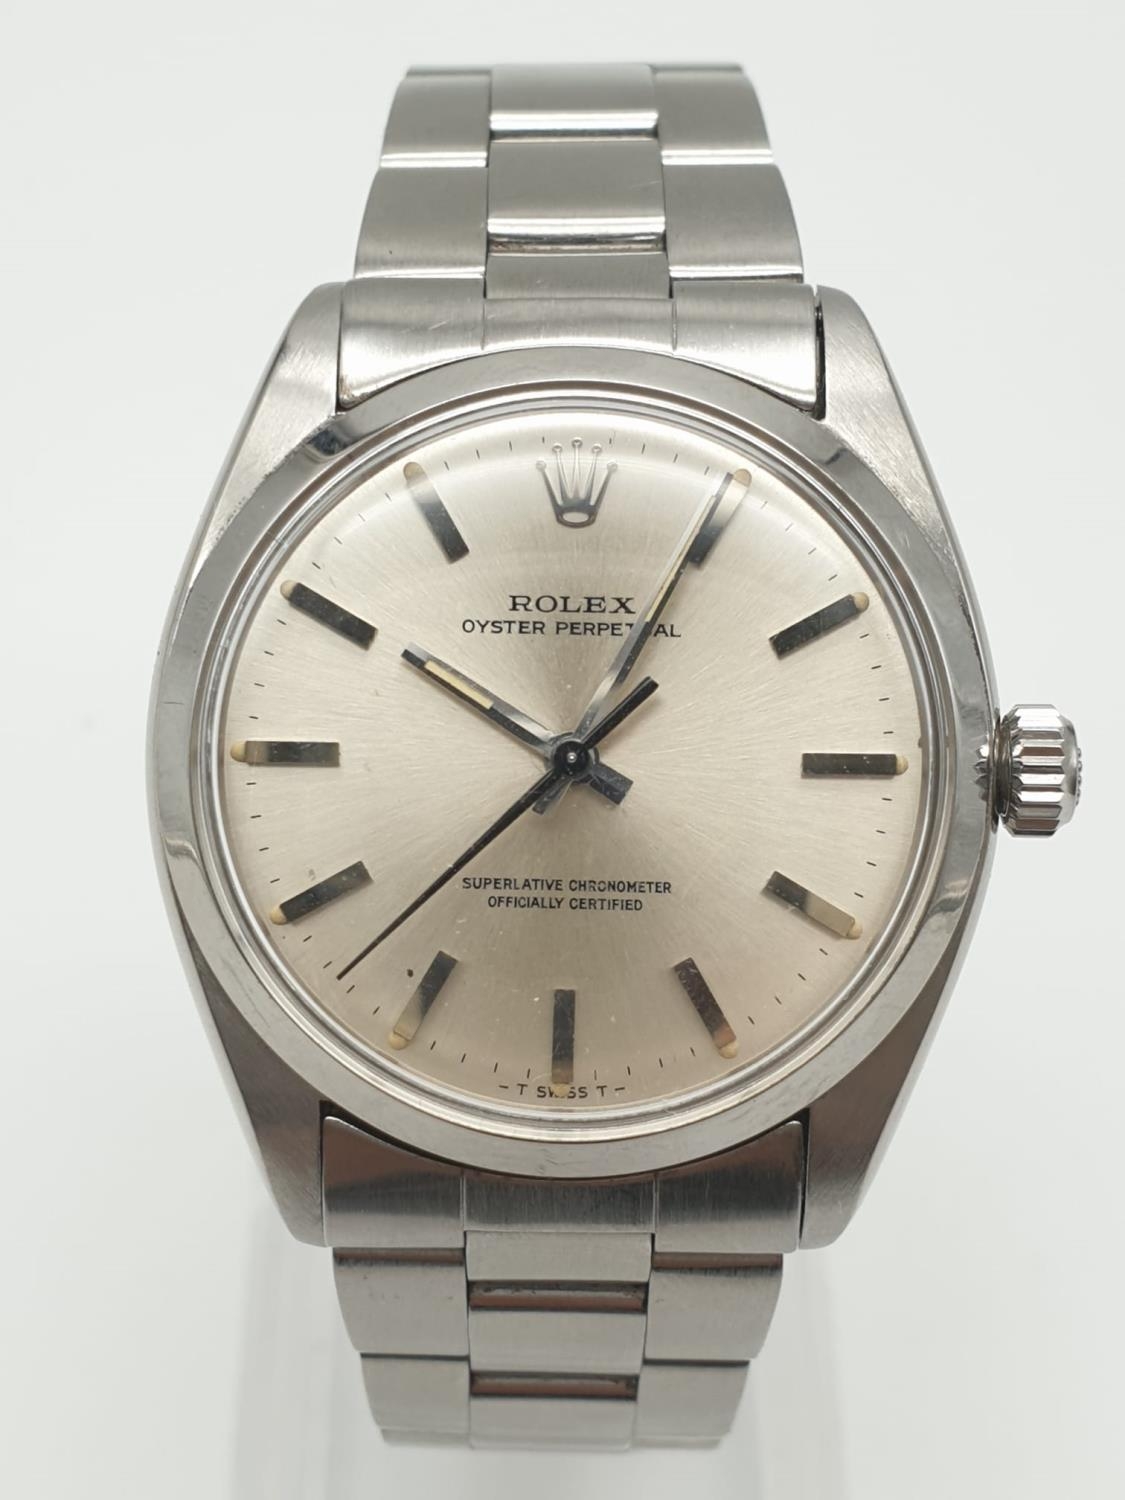 ROLEX OYSTER PERPETUAL WATCH IN STAINLESS STEEL, GOOD CODITION FWO 36MM